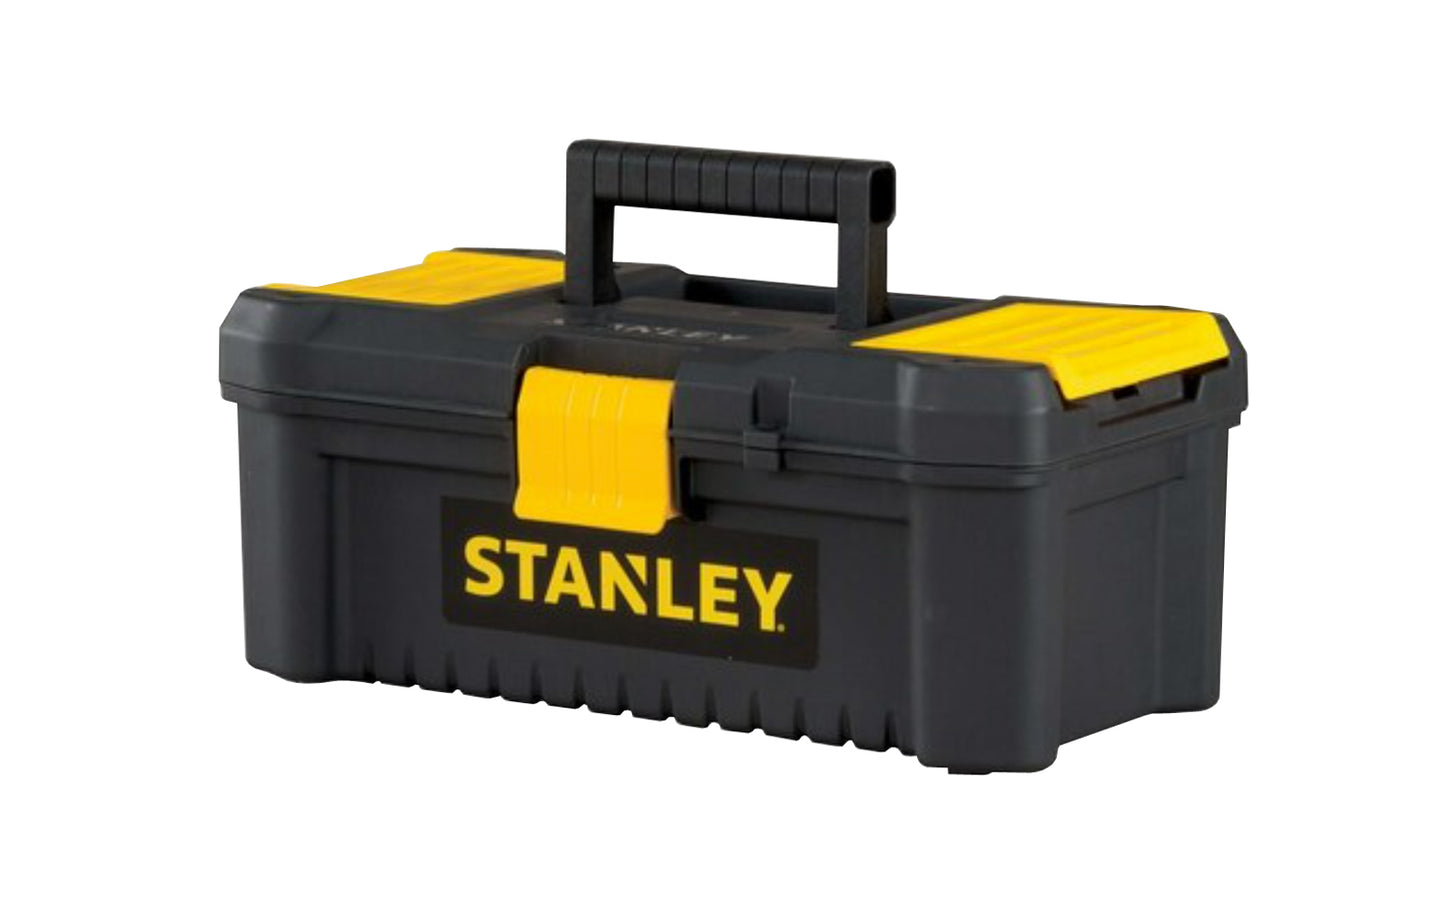 Stanley 12-1/2" "Essential" Toolbox is newly redesigned & engineered to satisfy virtually any storage need. It has top organizers for small parts organization & includes a tool tray with handle. It also has a padlock opening, which enables to lock the tool box. 076174755145. Model STST13331. Made in Isreal